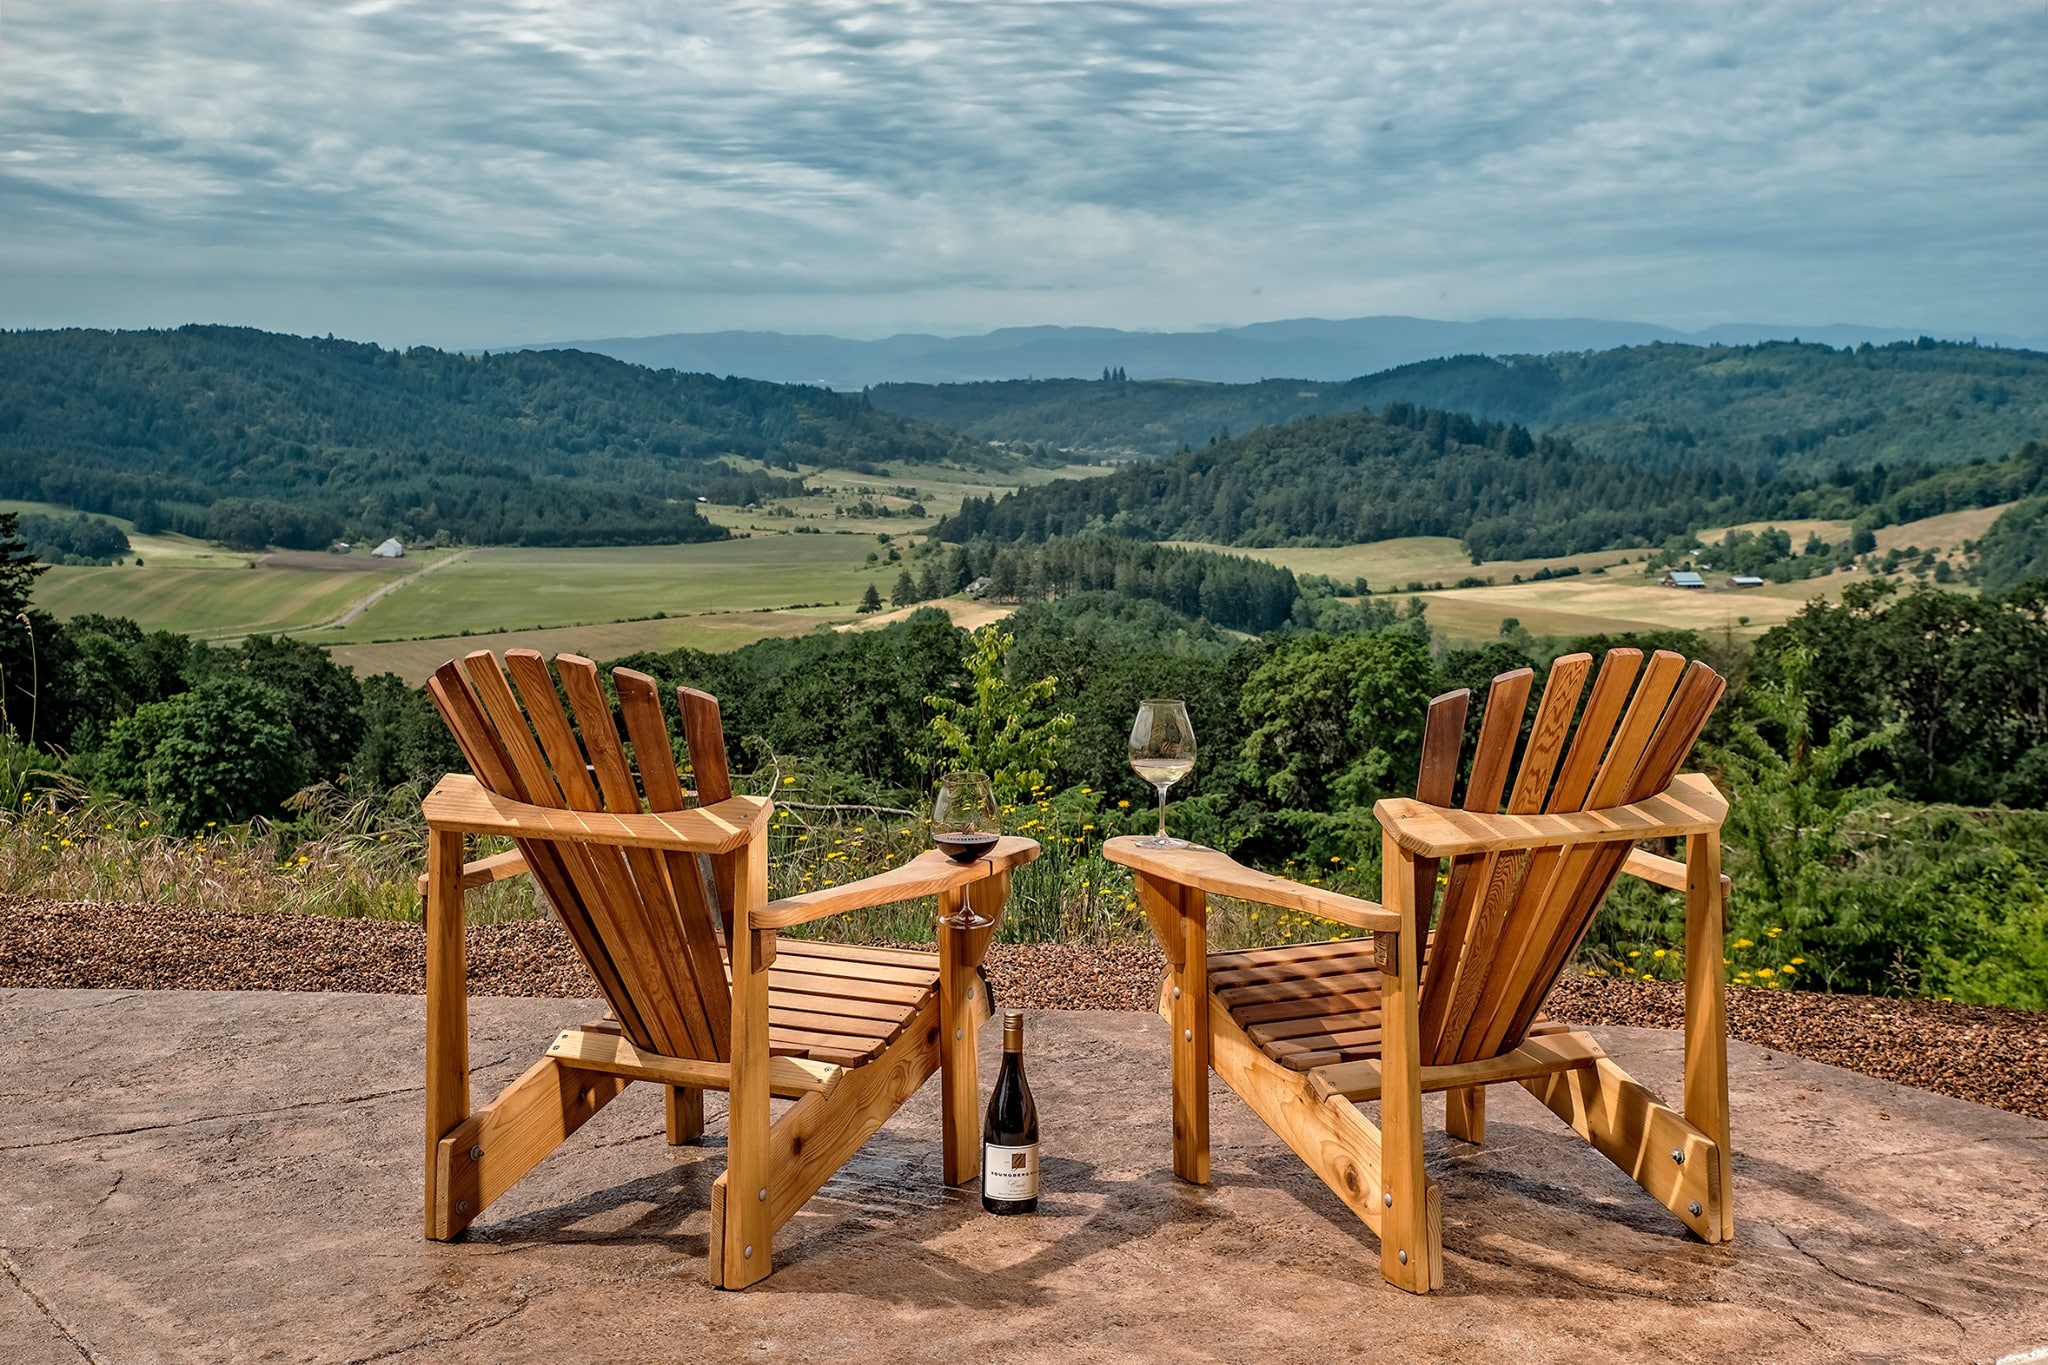 Youngberg Hill Inn and Winery Adirondack chairs view overlooking the Willamette Valley